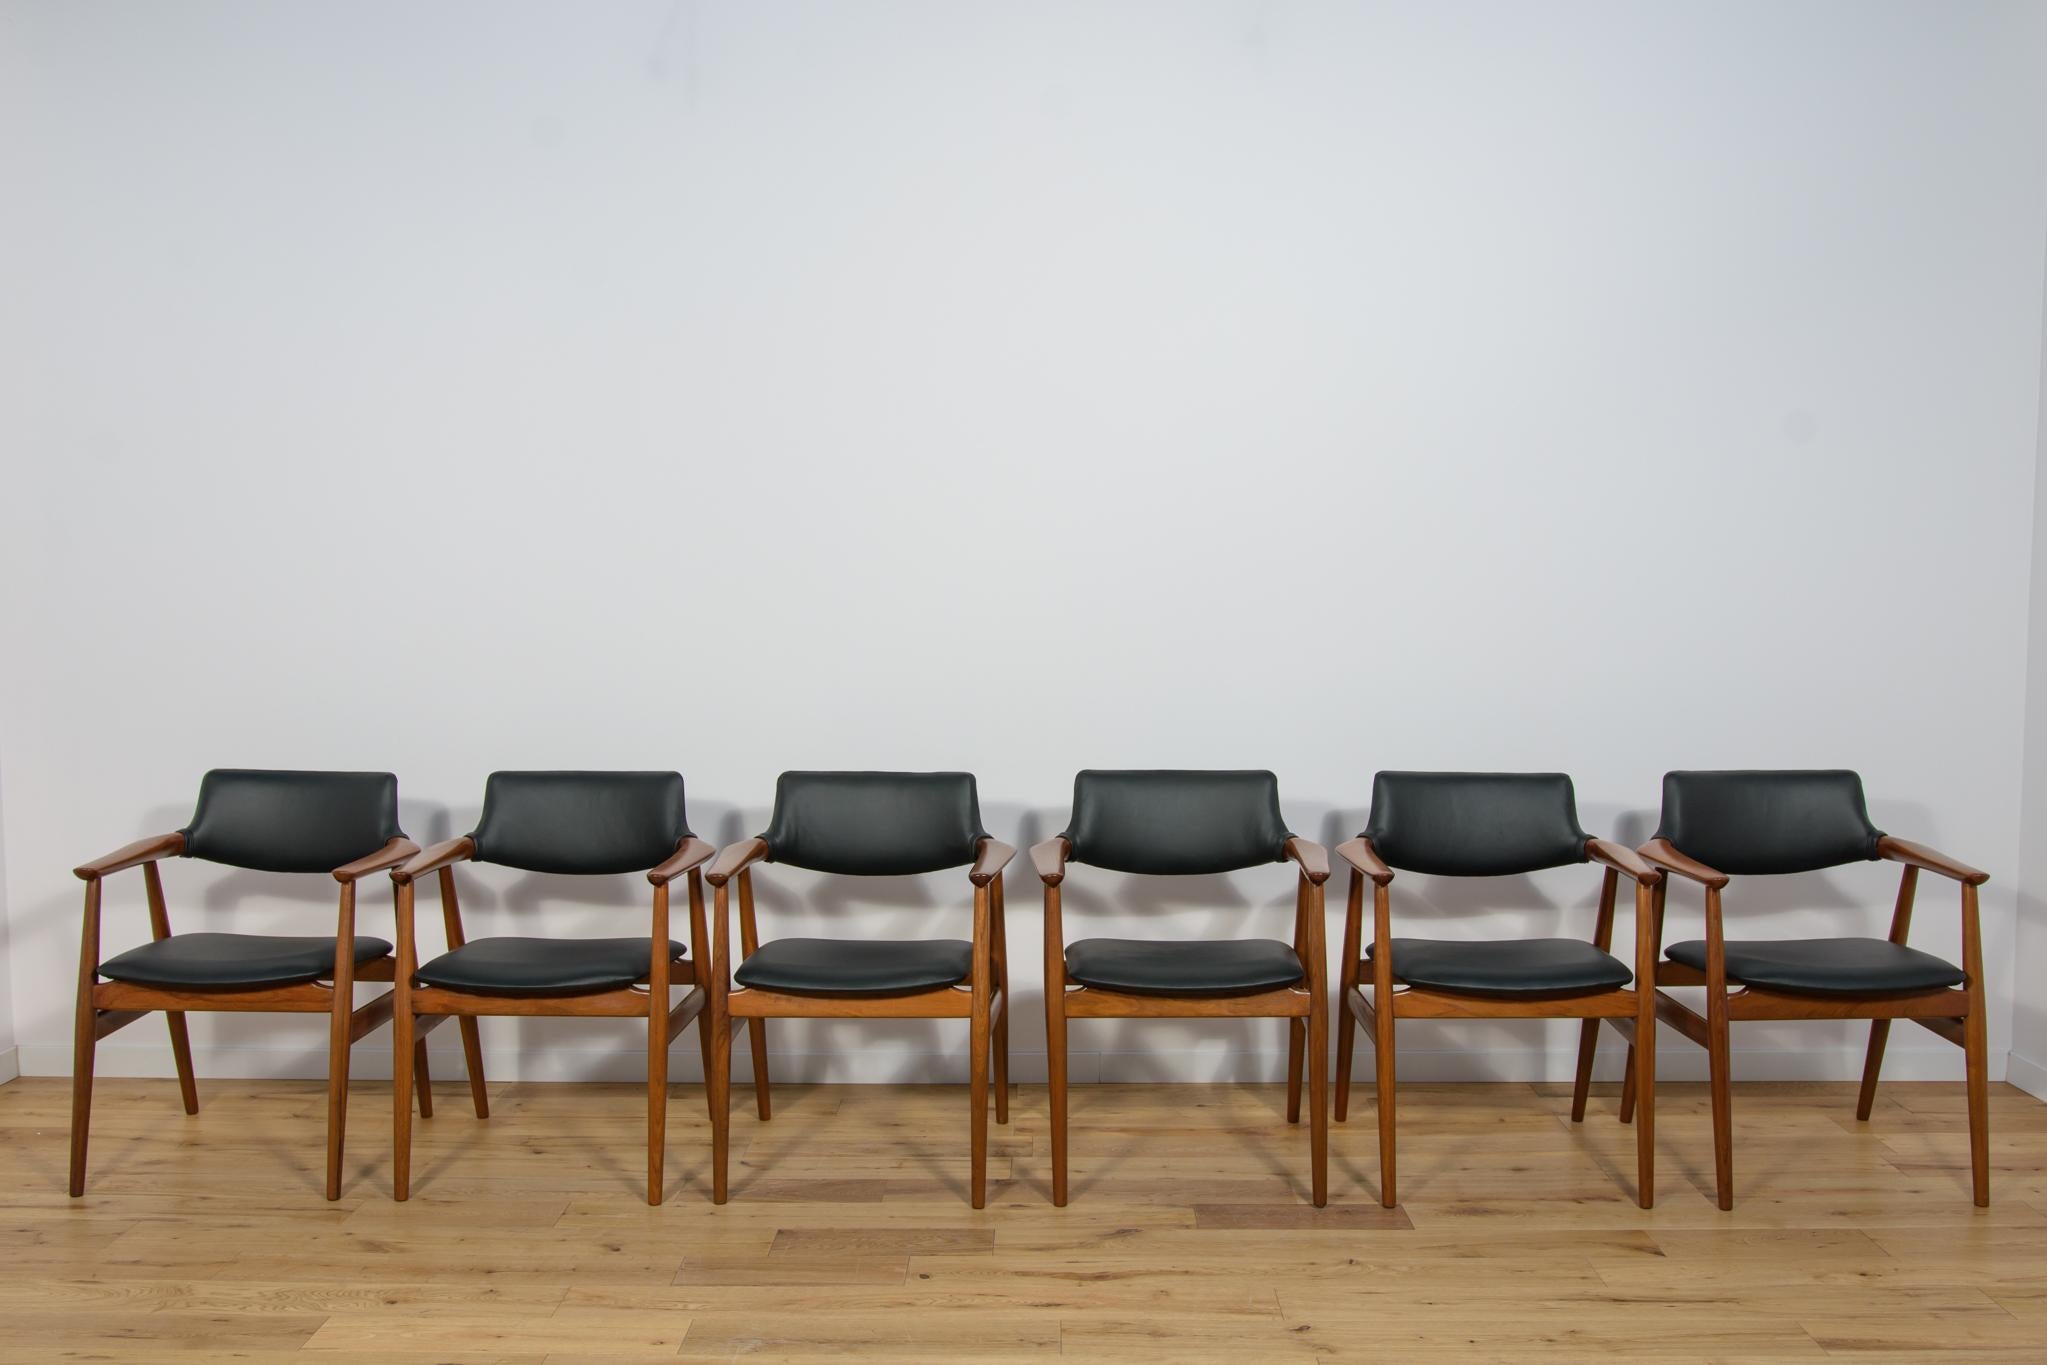 A set of six chairs designed by Svend Åge Eriksen for the Danish manufacture Glostrup in the 1960s. Chairs with a beautiful, unique form, testifying to the high craftsmanship of design and workmanship, characteristic of Danish design from the 60s.